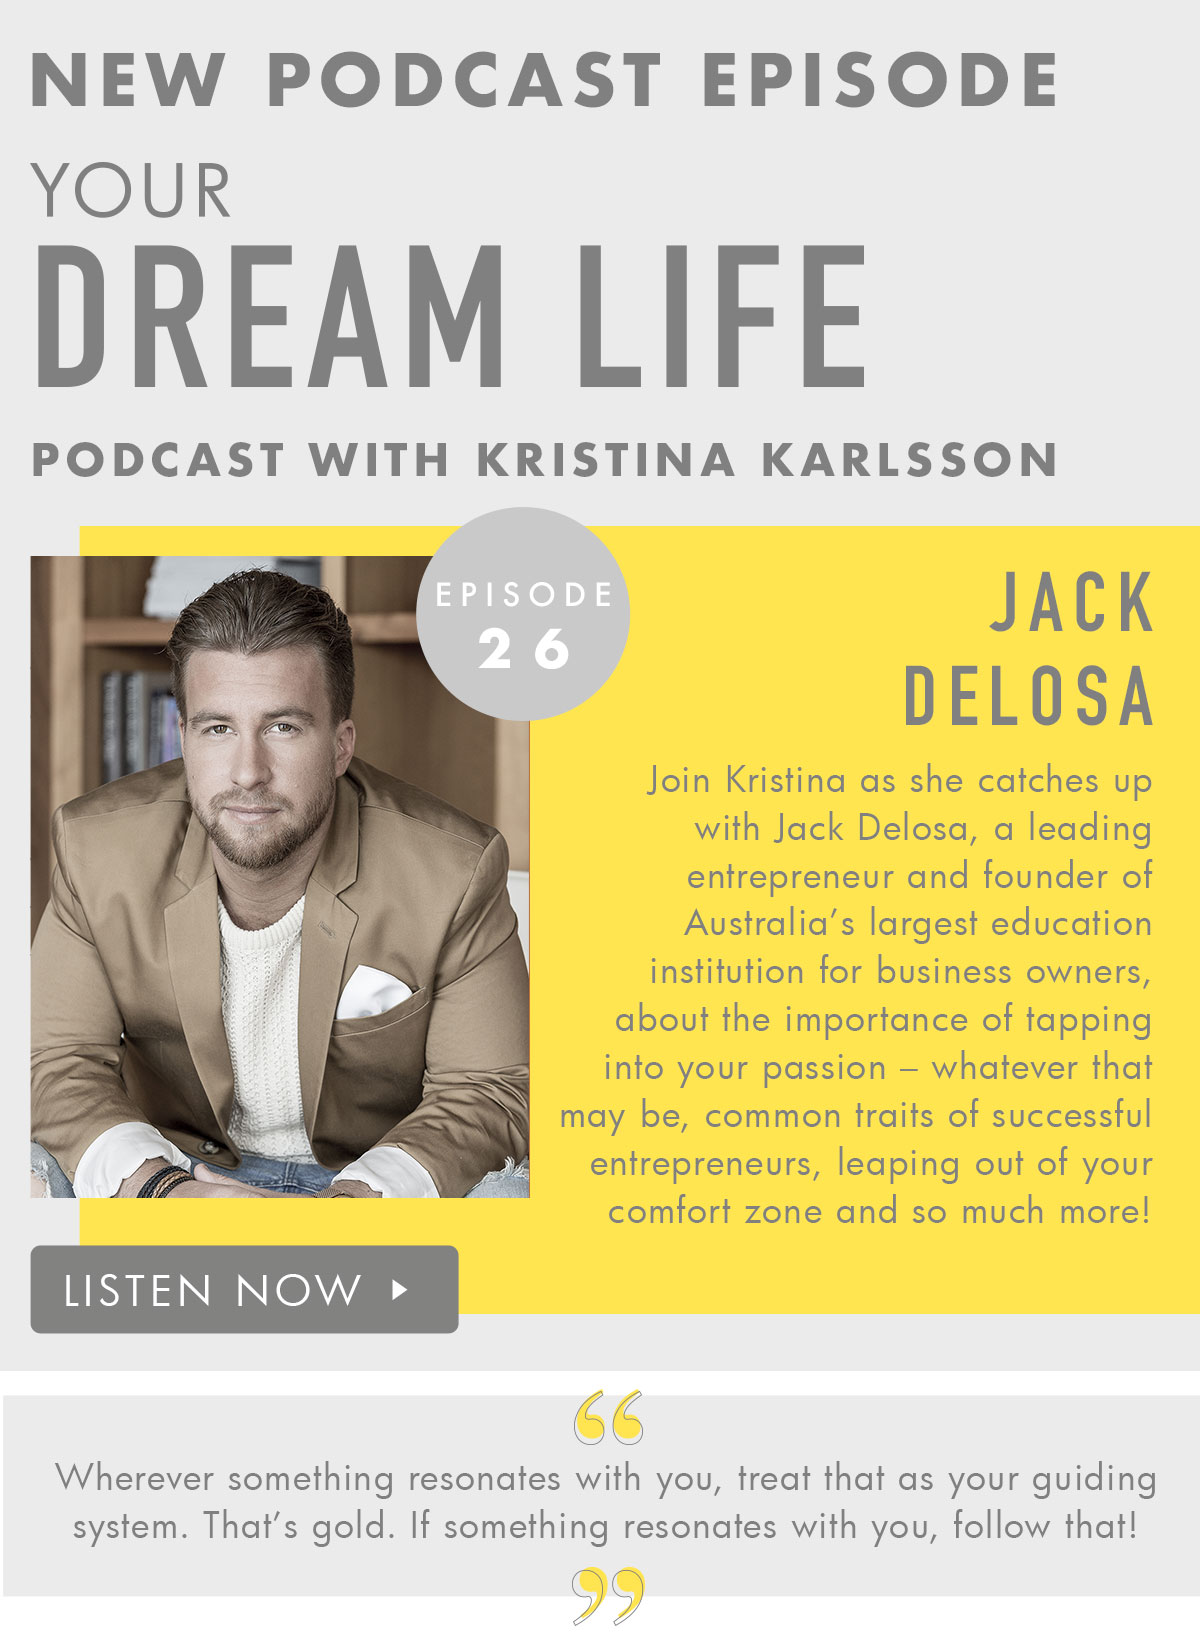 Your Dream Life Podcast New Episode. Listen now. 